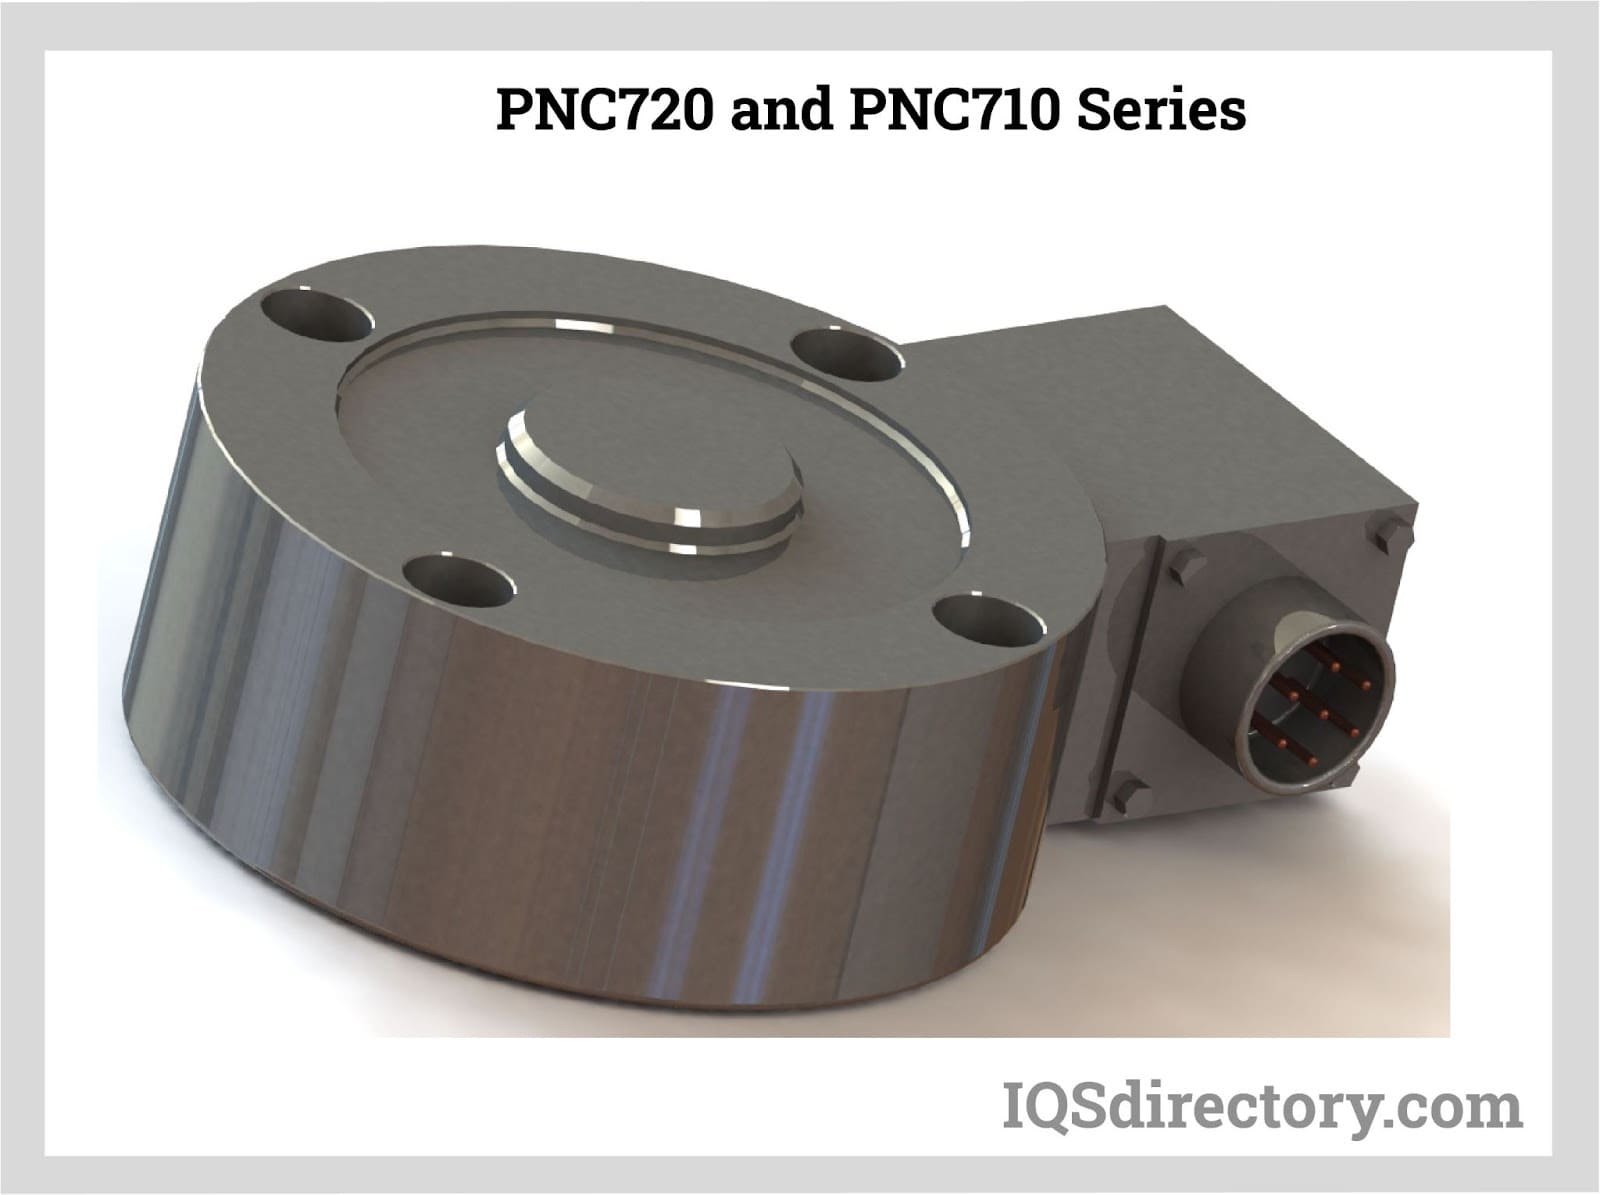 PNC720 and PNC710 Series